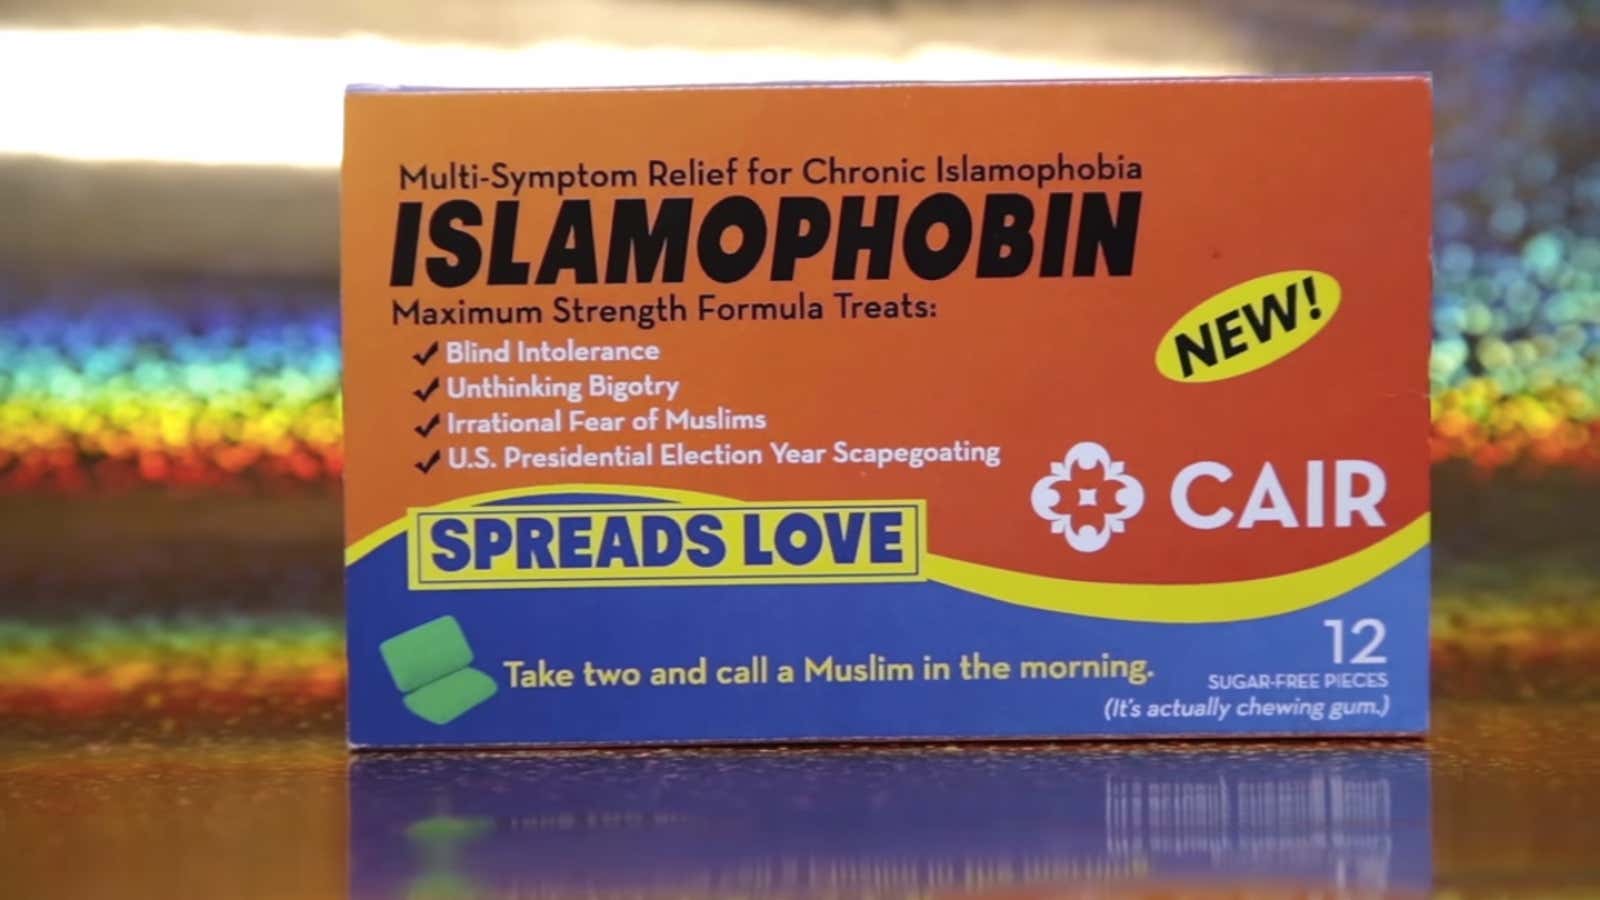 “Take two and call a Muslim in the morning.”